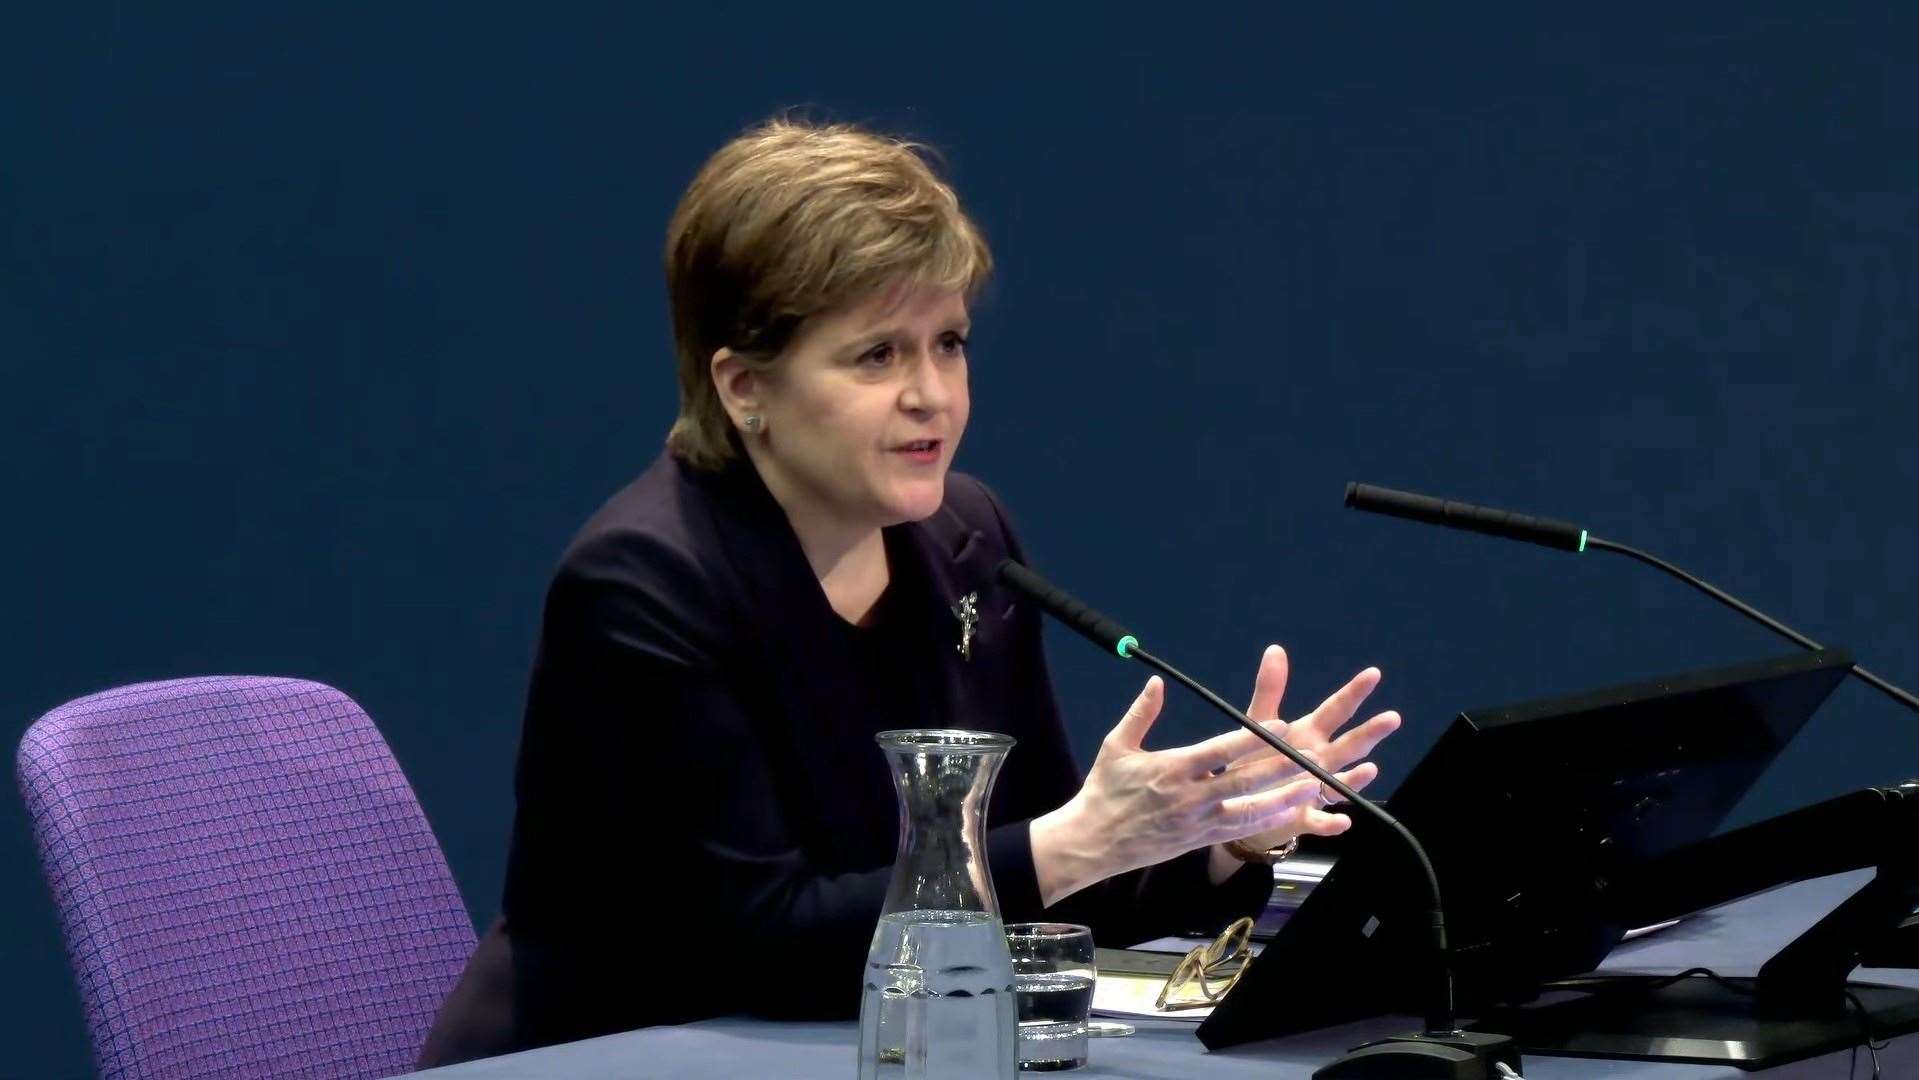 Nicola Sturgeon was questioned about her deleted WhatsApp messages when she appeared before the UK Covid-19 Inquiry (UK Covid-19 Inquiry/PA)